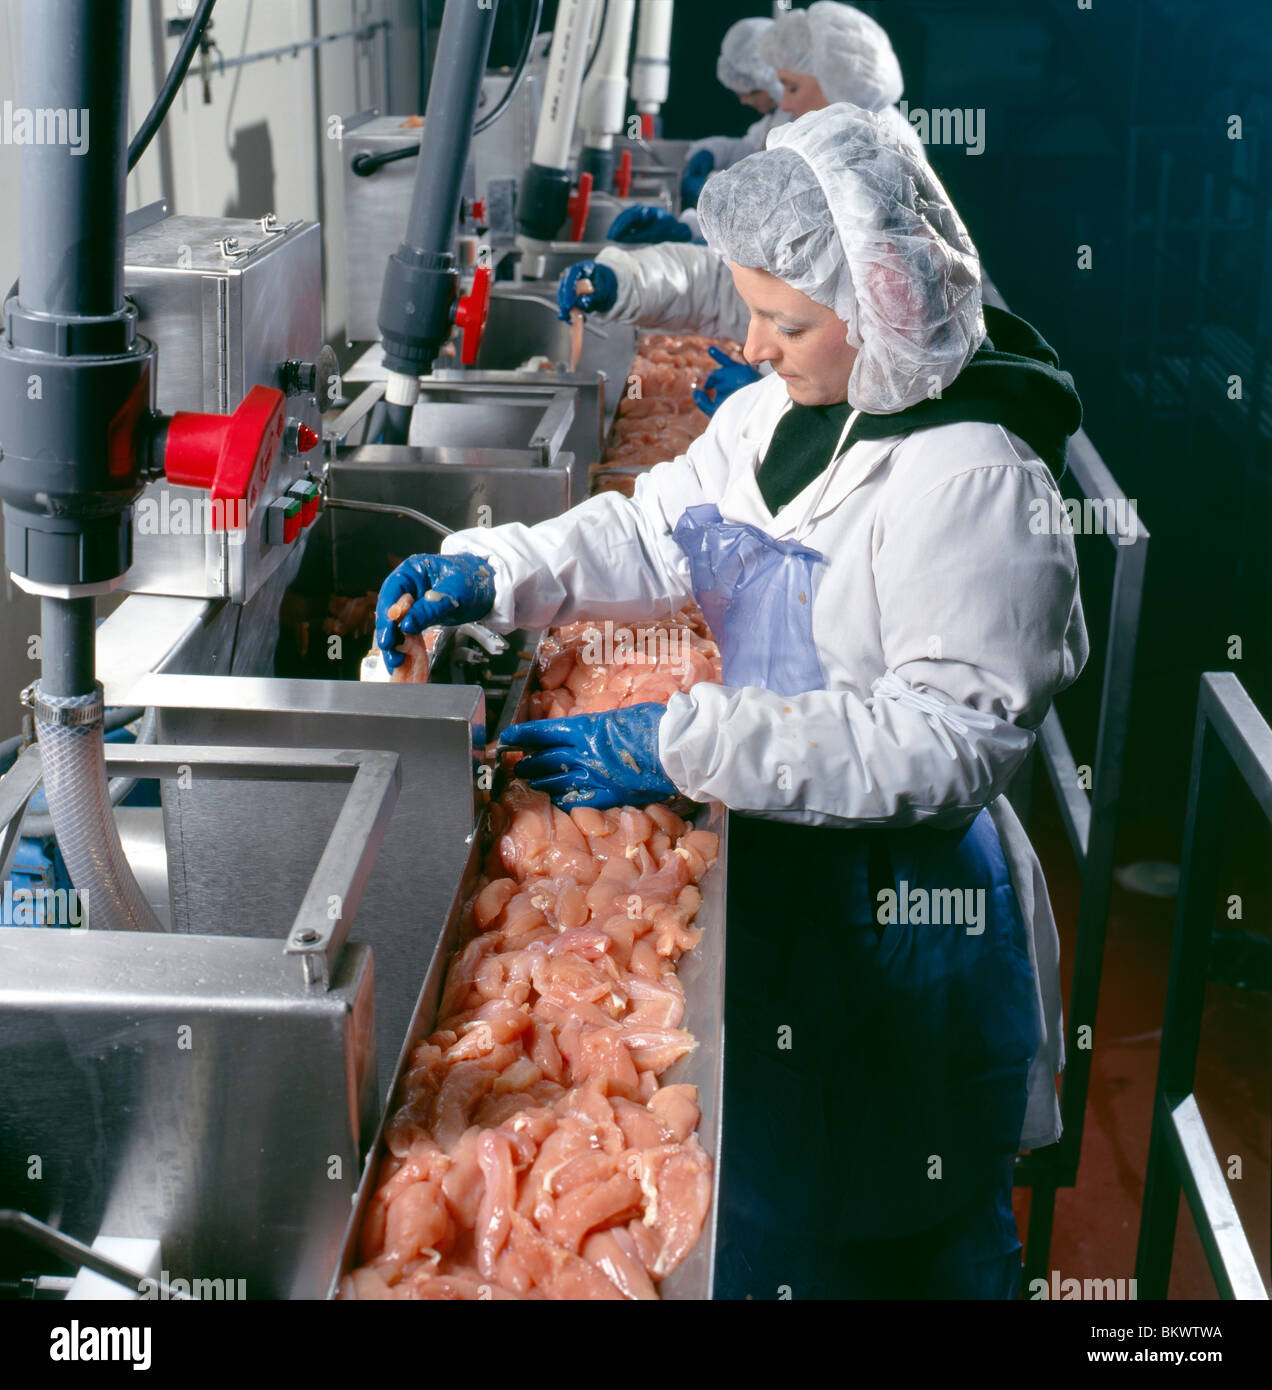 Workers at a stainless steel assembly line that produces chicken for the restaurant industry Stock Photo